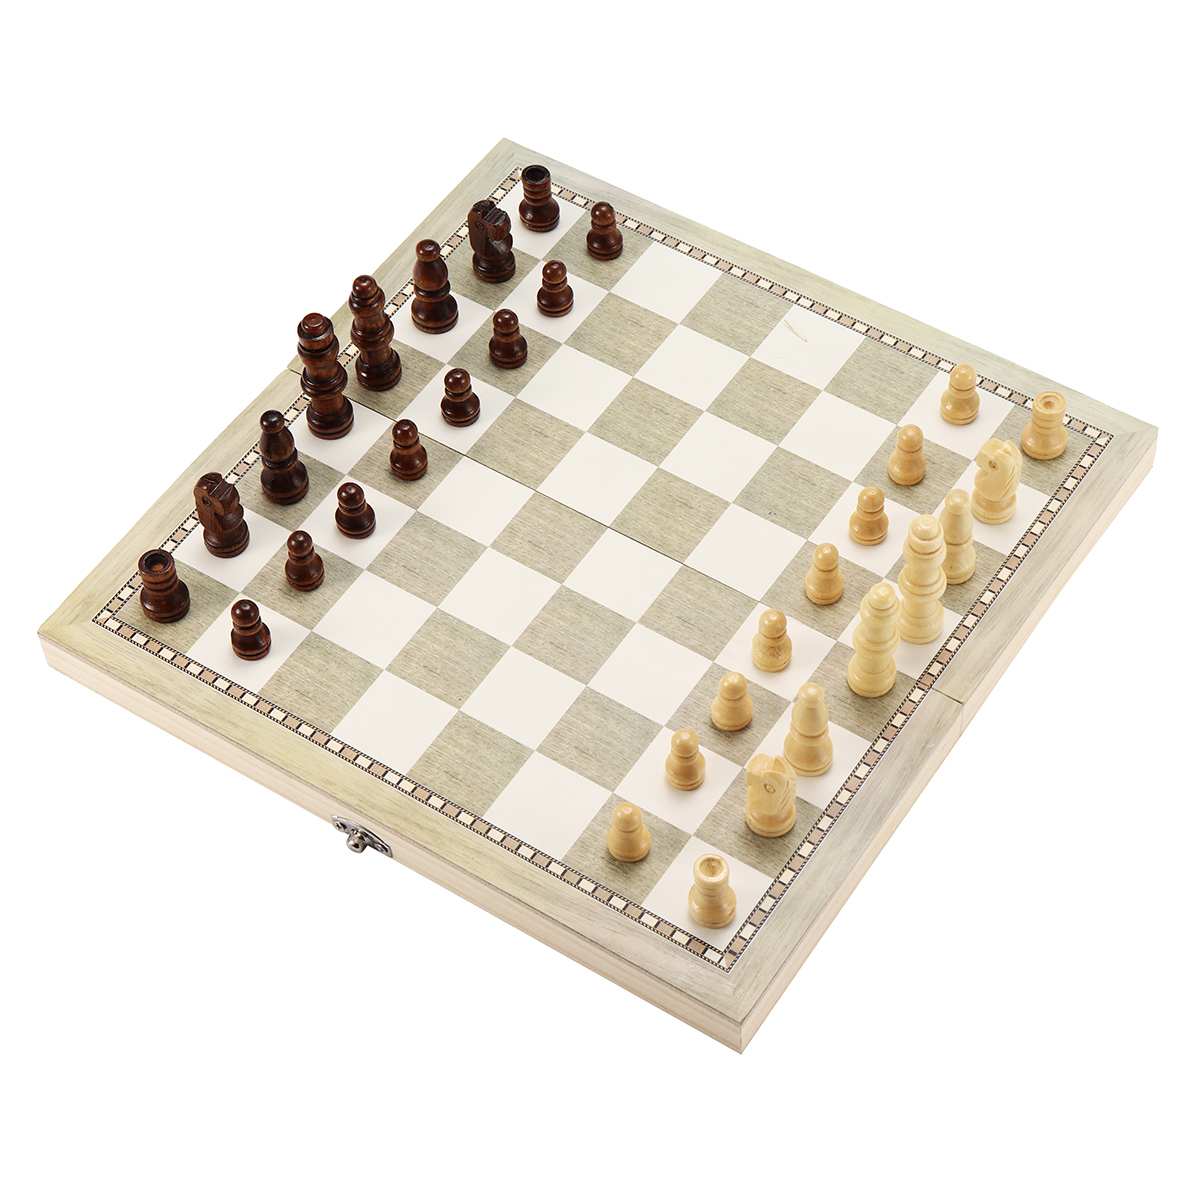 Board game toy kit foldable wooden chess set travel game chess backgammon checkers toy children chess entertainment